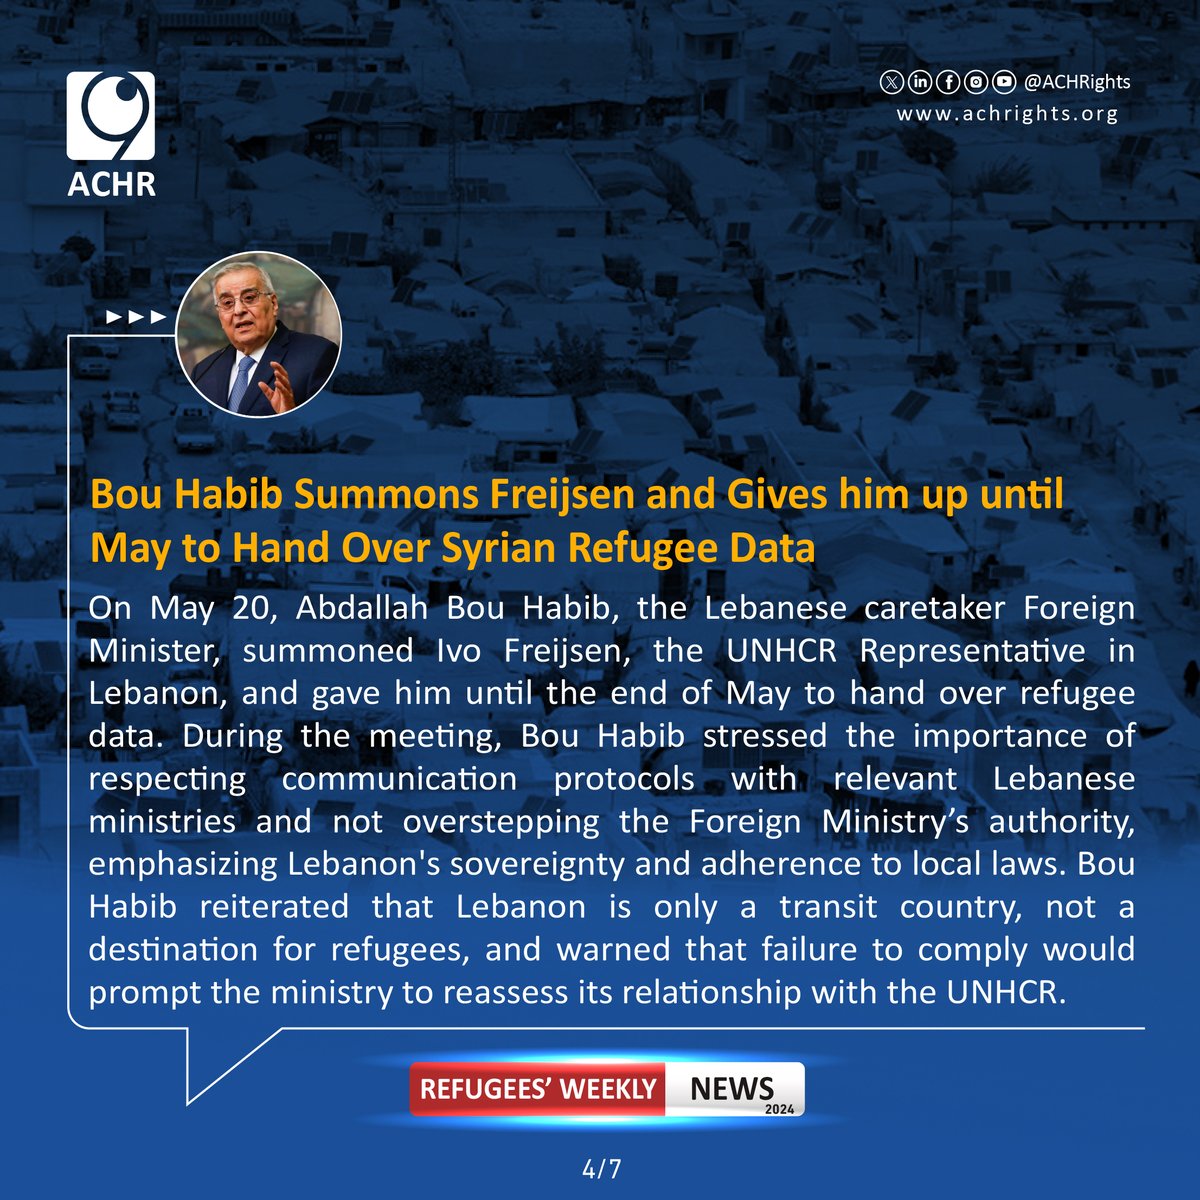 Bou Habib Summons Freijsen and Gives him up until May to Hand Over Syrian Refugee Data.
#Together_for_Human_Rights #weeklynews #violations #humanrights #syrianrefugees #lebanon #syria #RefugeesRight